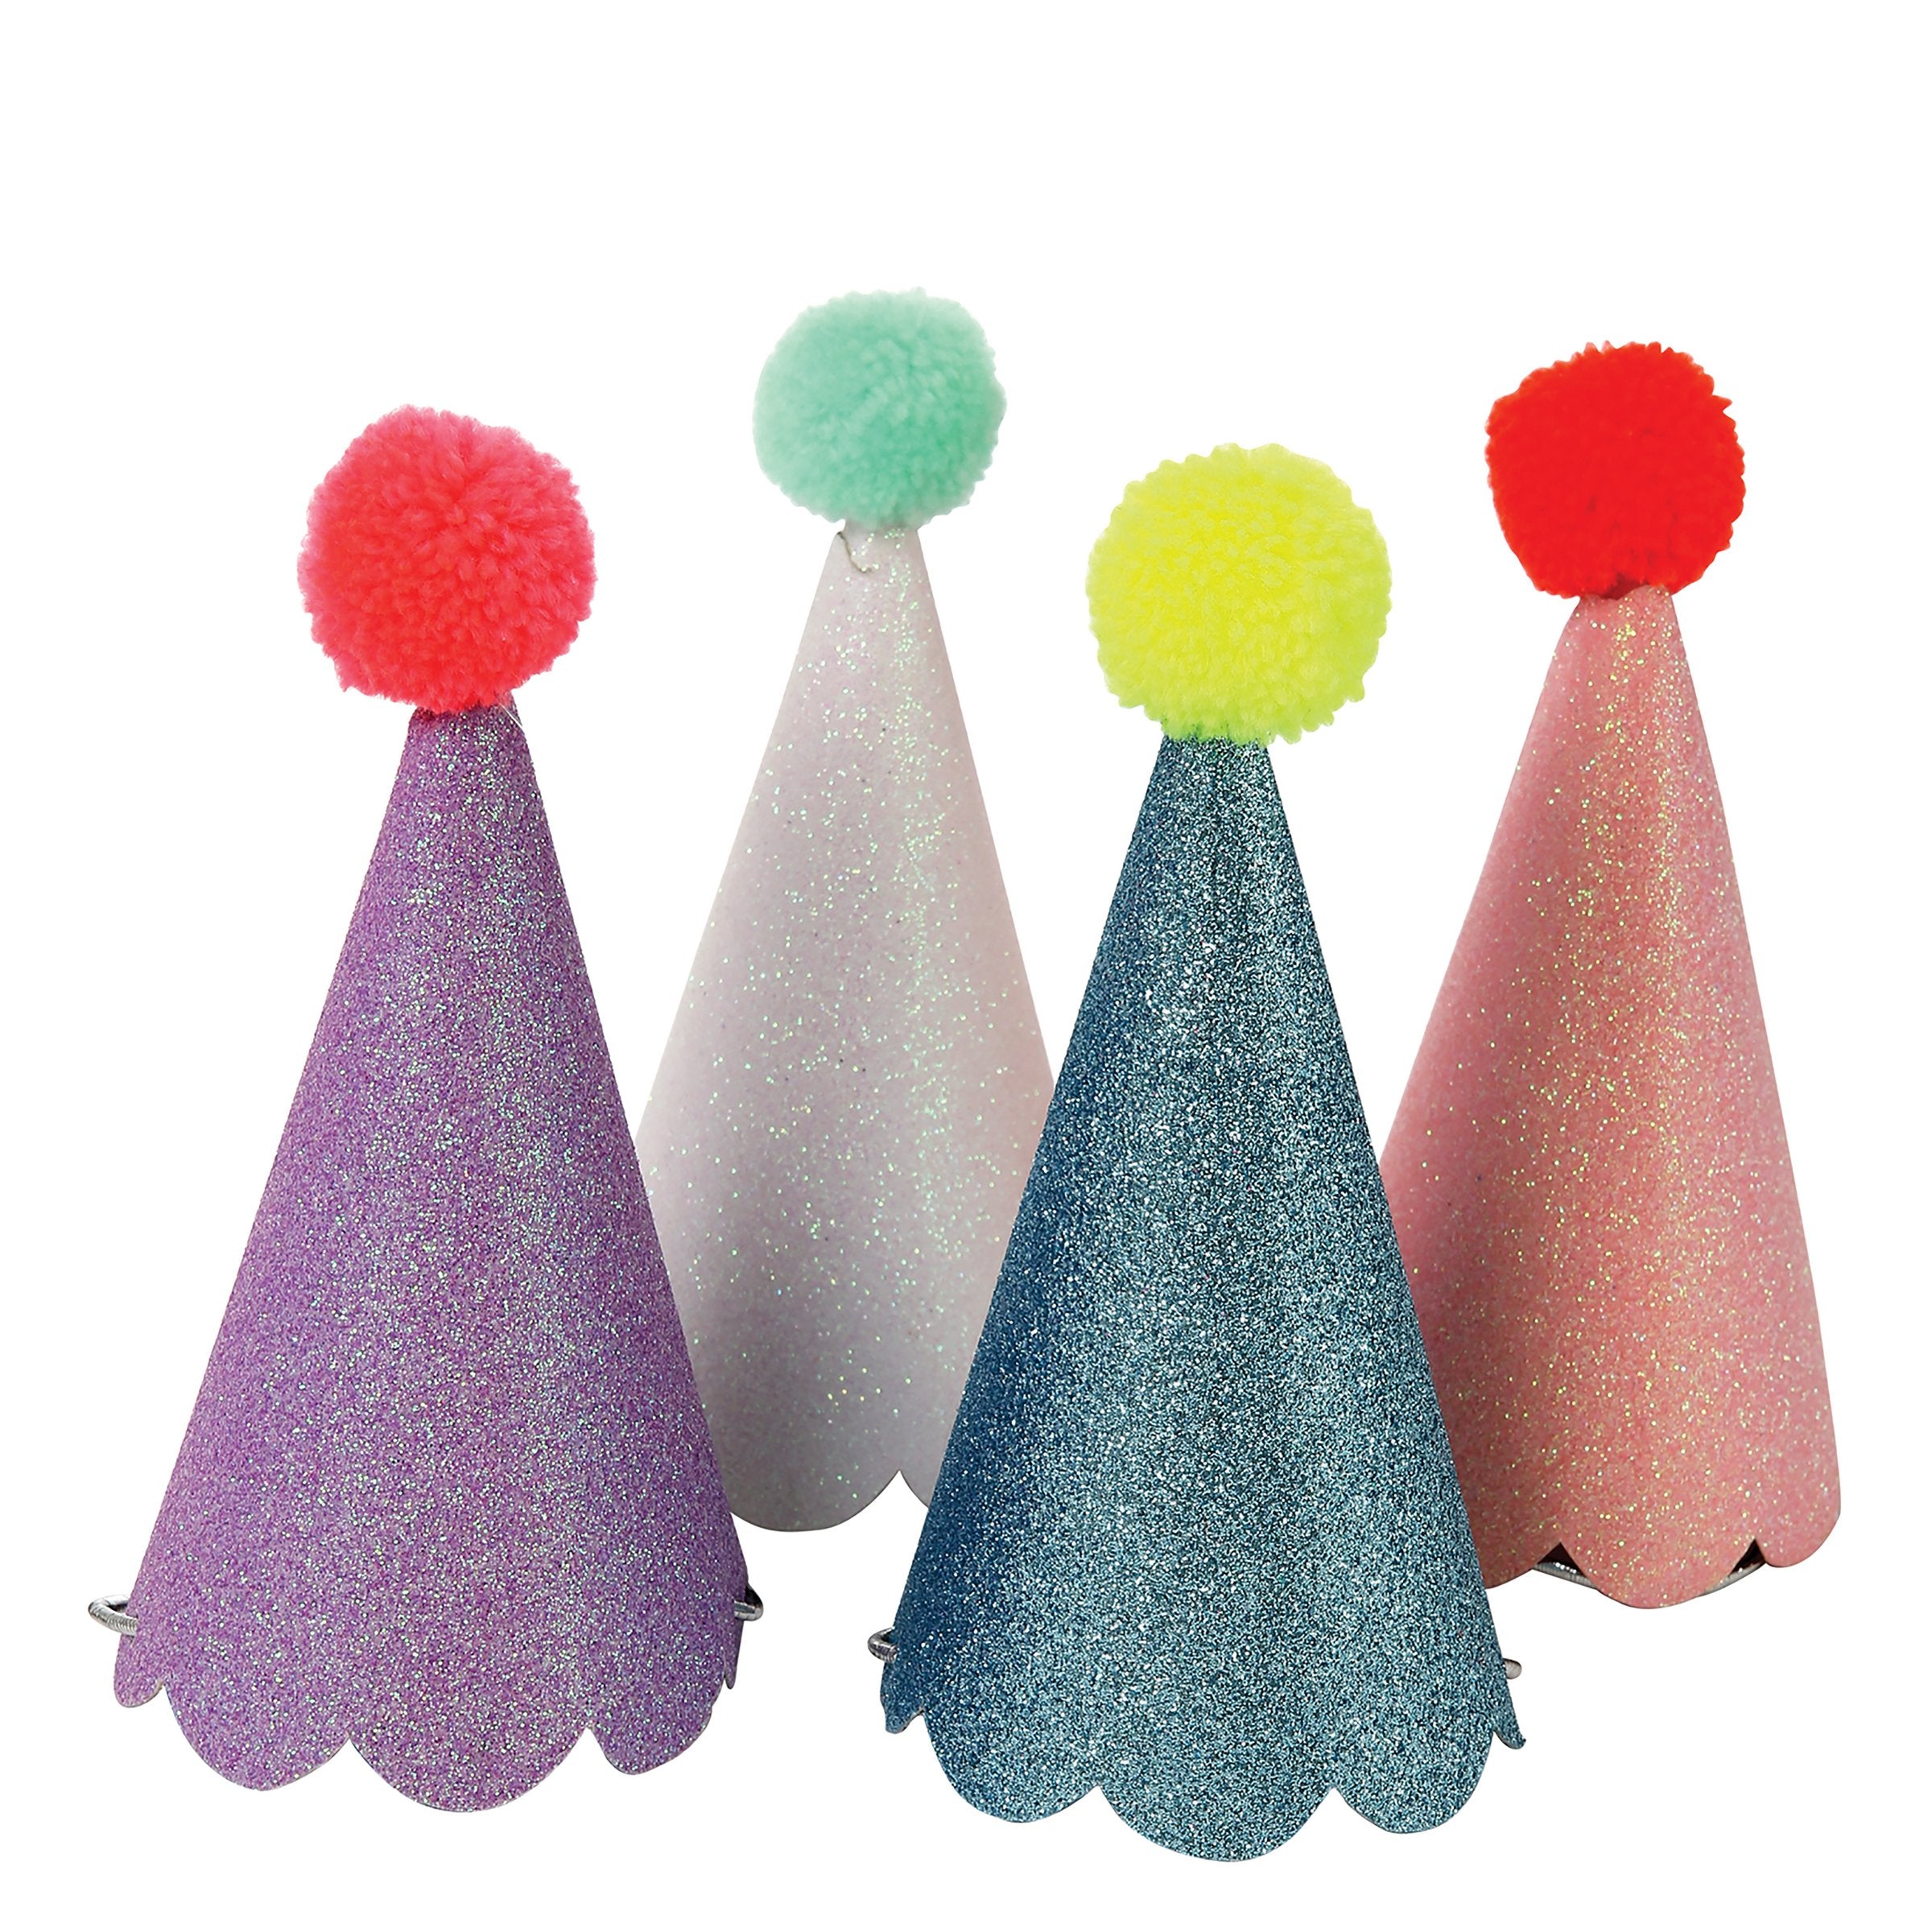 These fun hats are topped with colourful pompoms and covered with crystal glitter.